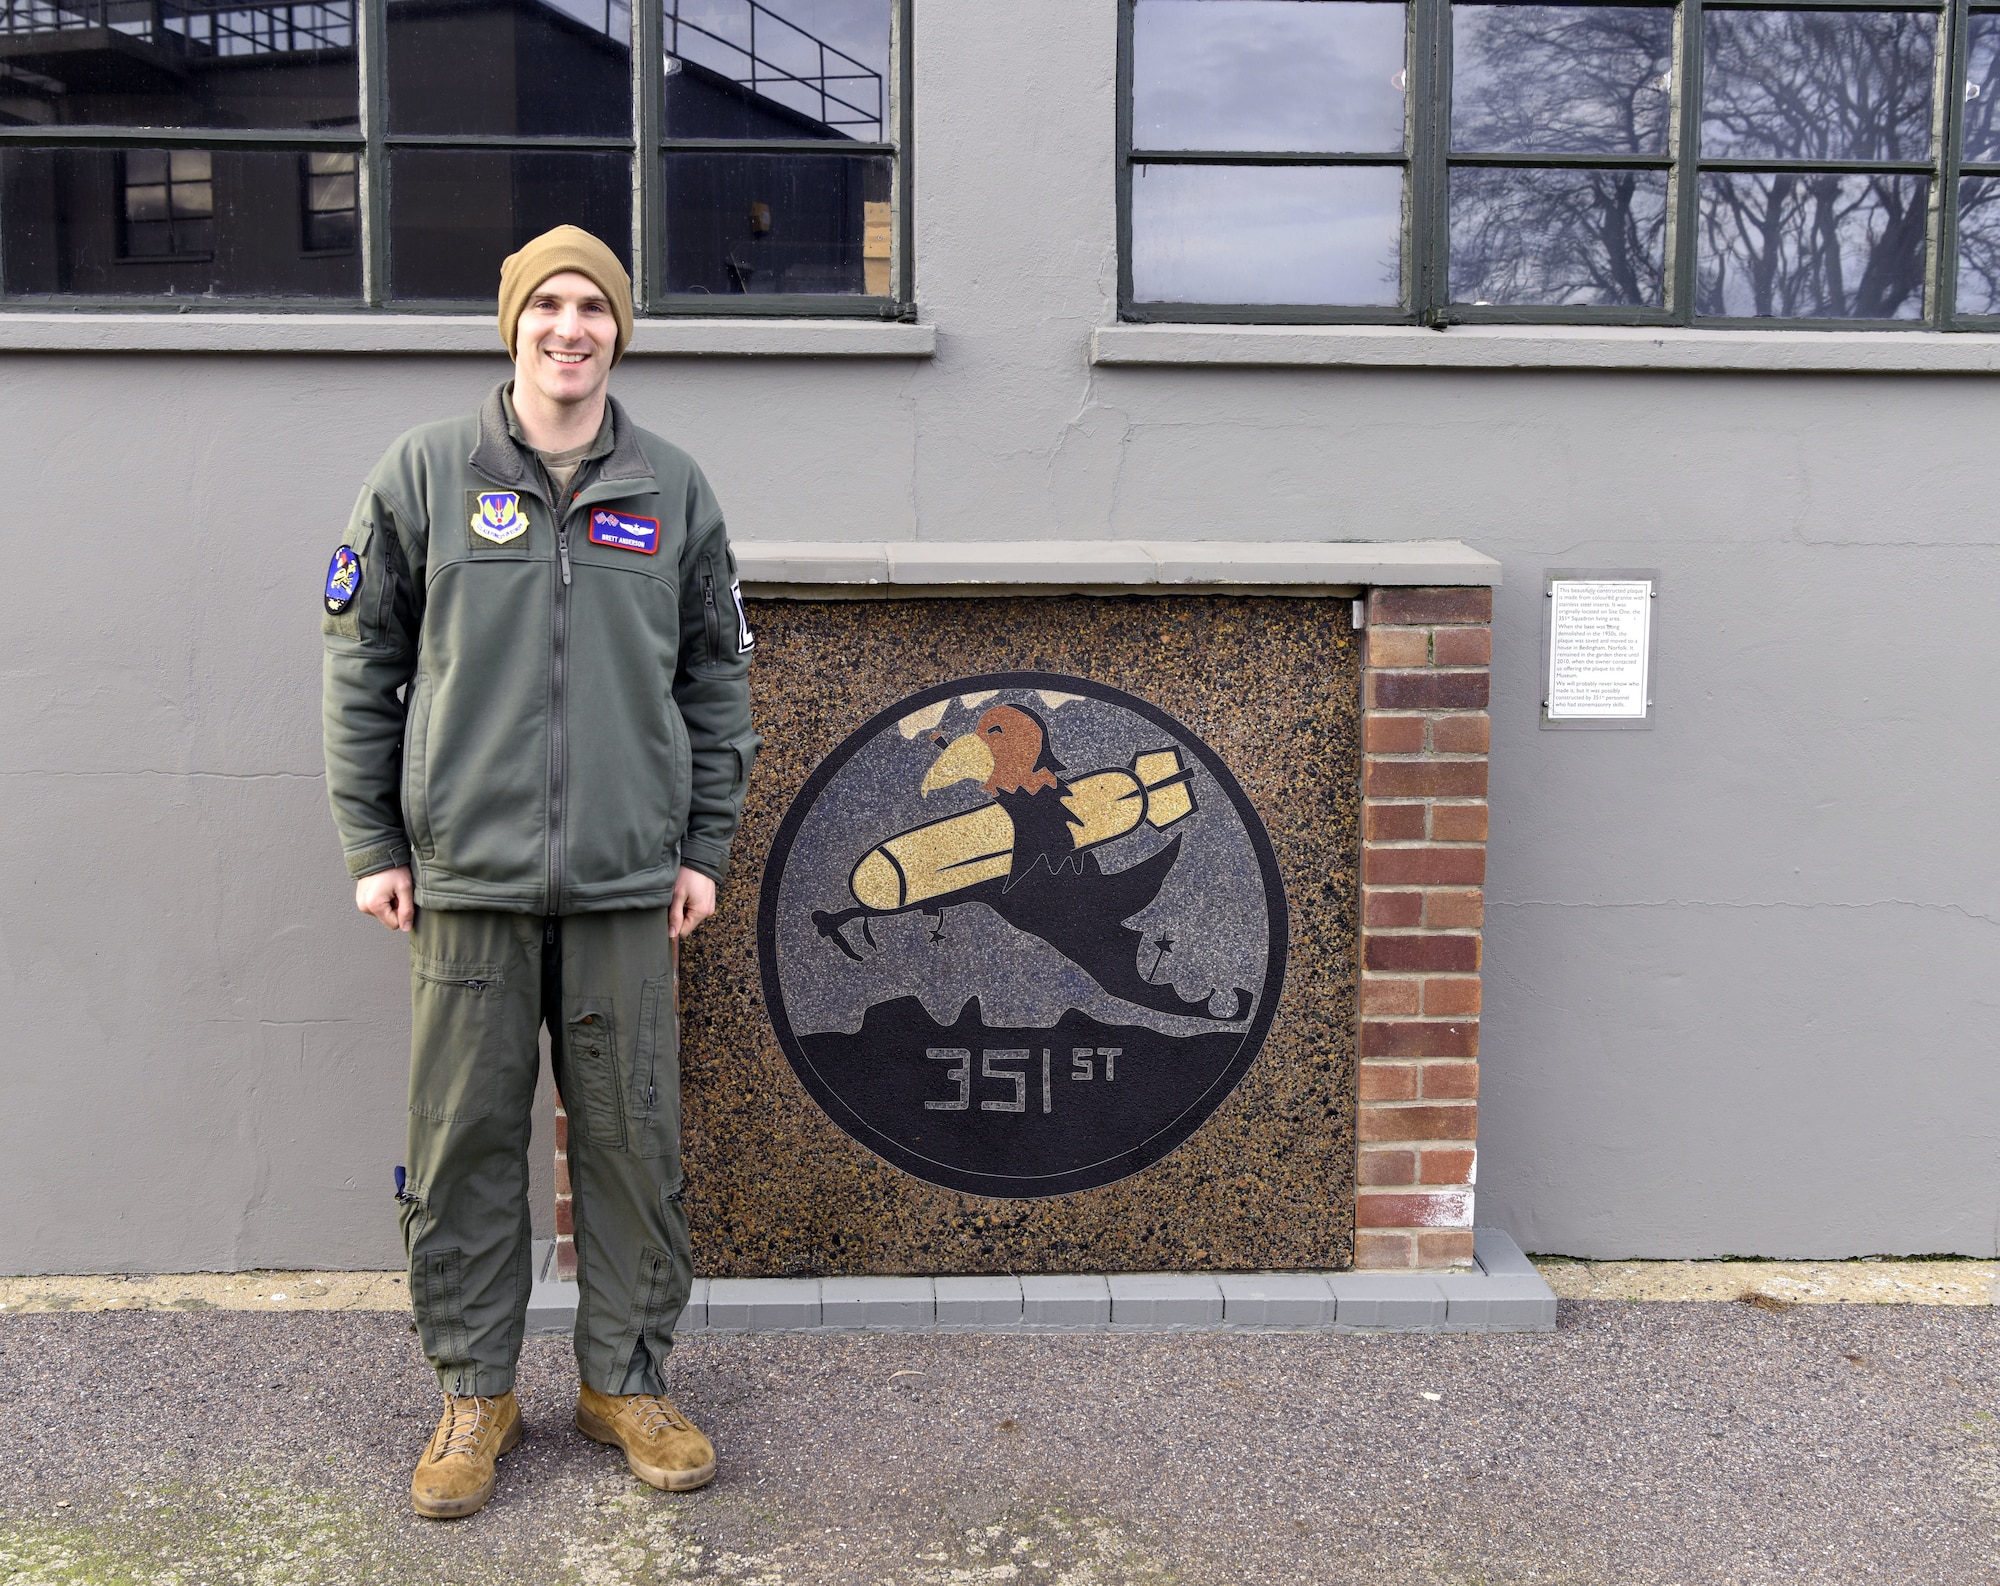 U.S. Air Force Capt. Brett Anderson, 351st Air Refueling Squadron KC-135 Stratotanker pilot and currently on loan to the 100th Operations Squadron, stands by a memorial heritage patch near the original control tower of the 351st Bomb Squadron and 100th Bomb Group Feb. 2, 2023, at the 100th BG Memorial Museum, Thorpe Abbotts, Diss, England. The 351st ARS at Royal Air Force Mildenhall is the third squadron Anderson has been assigned to, and all three – 351st ARS, 350th ARS and 350th ARS both at McConnell Air Force Base – are heritage squadrons from the 100th BG. (U.S. Air Force photo by Karen Abeyasekere)